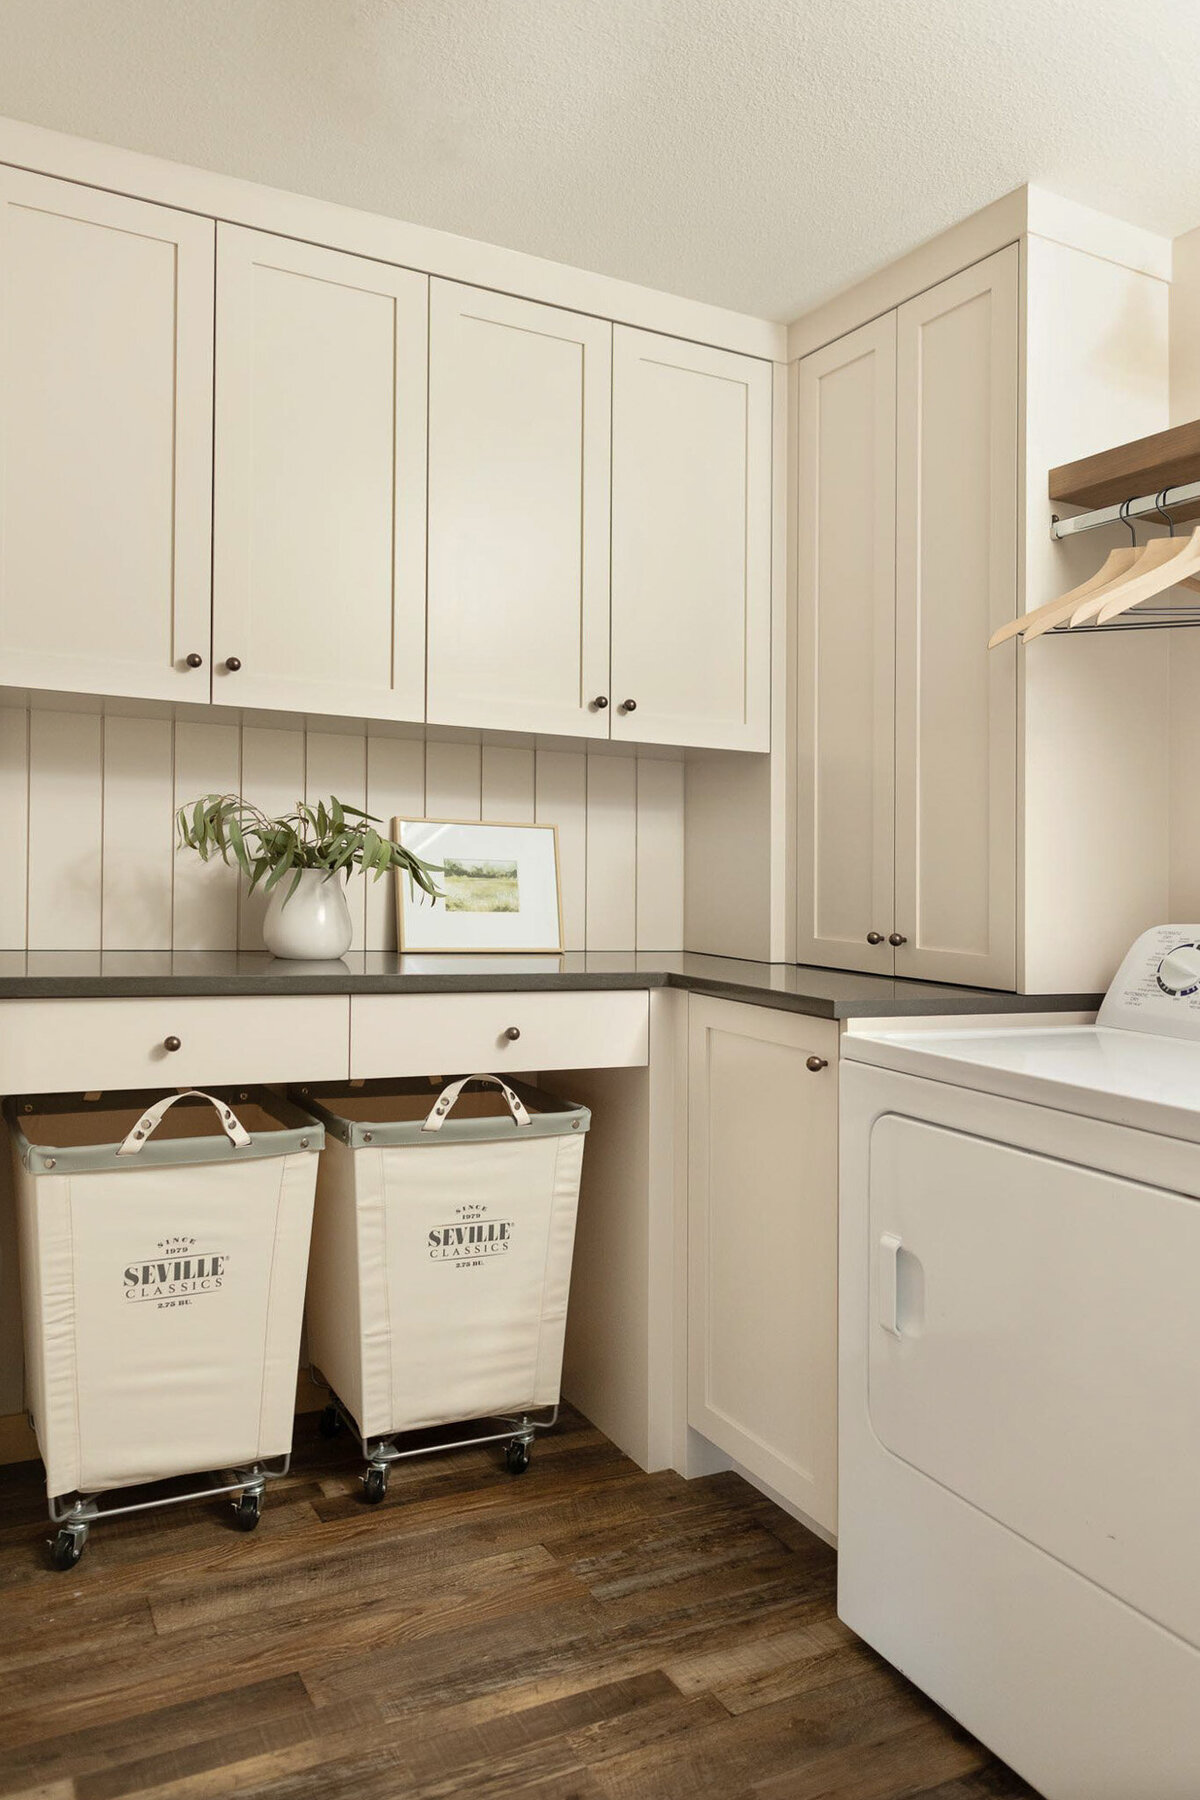 Laundry room with dark brown wood floors. Open shelving area with upholstered laundry hampers on casters. Beige cabinetry and shiplap walls. Beige cabinet with doors with antique bronze knobs. Grey quartz countertops above with open shelving painted beige. Shelves adorned with glass jars of laundry detergent and pods, cleaning spray bottles, towels, jars, and wicker baskets.